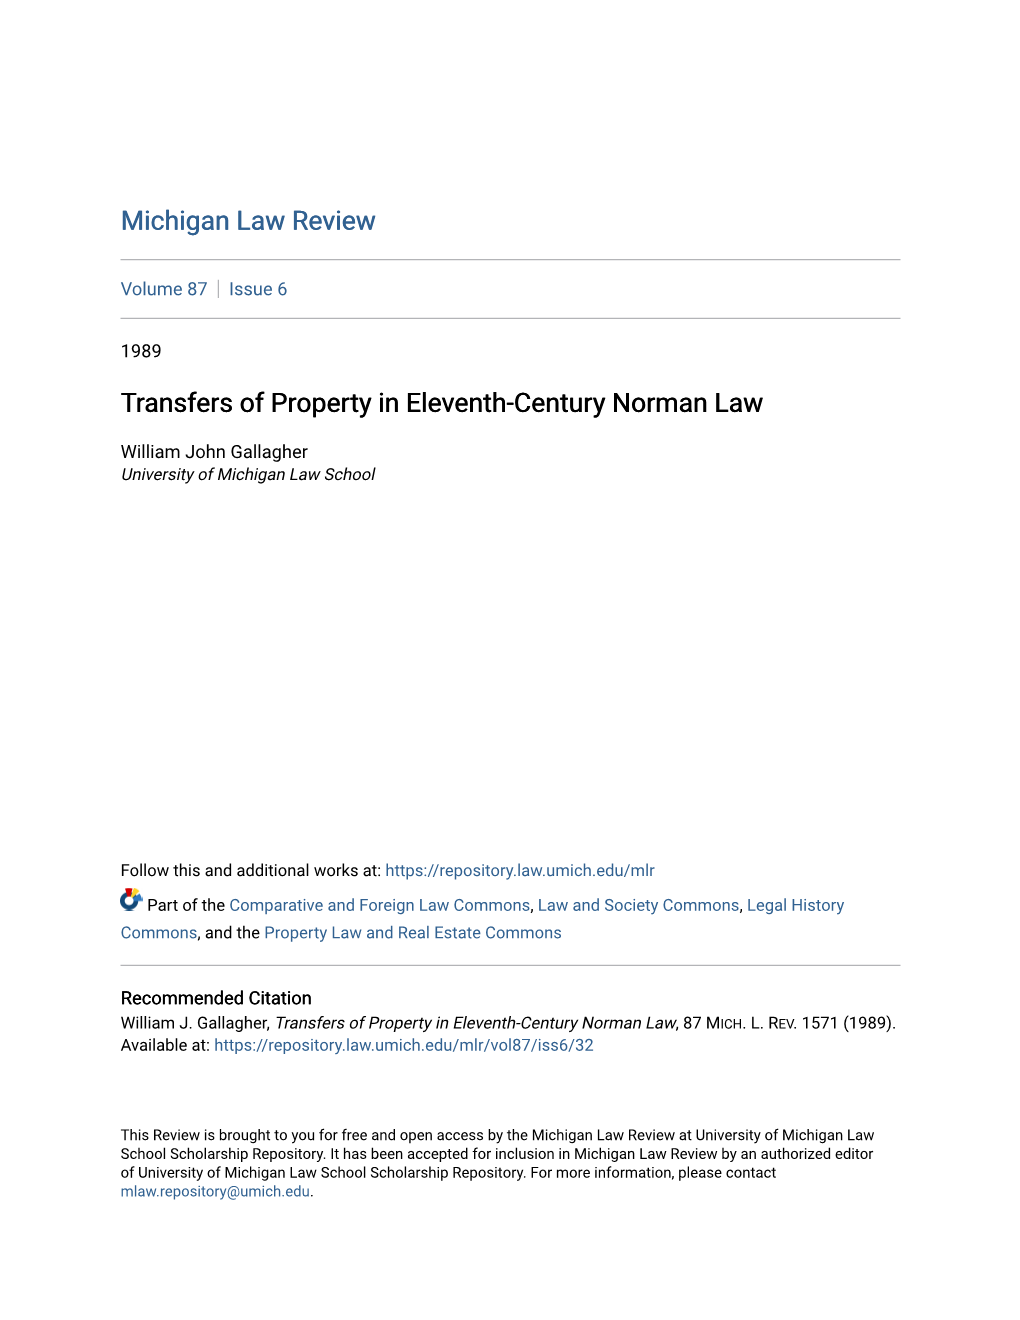 Transfers of Property in Eleventh-Century Norman Law